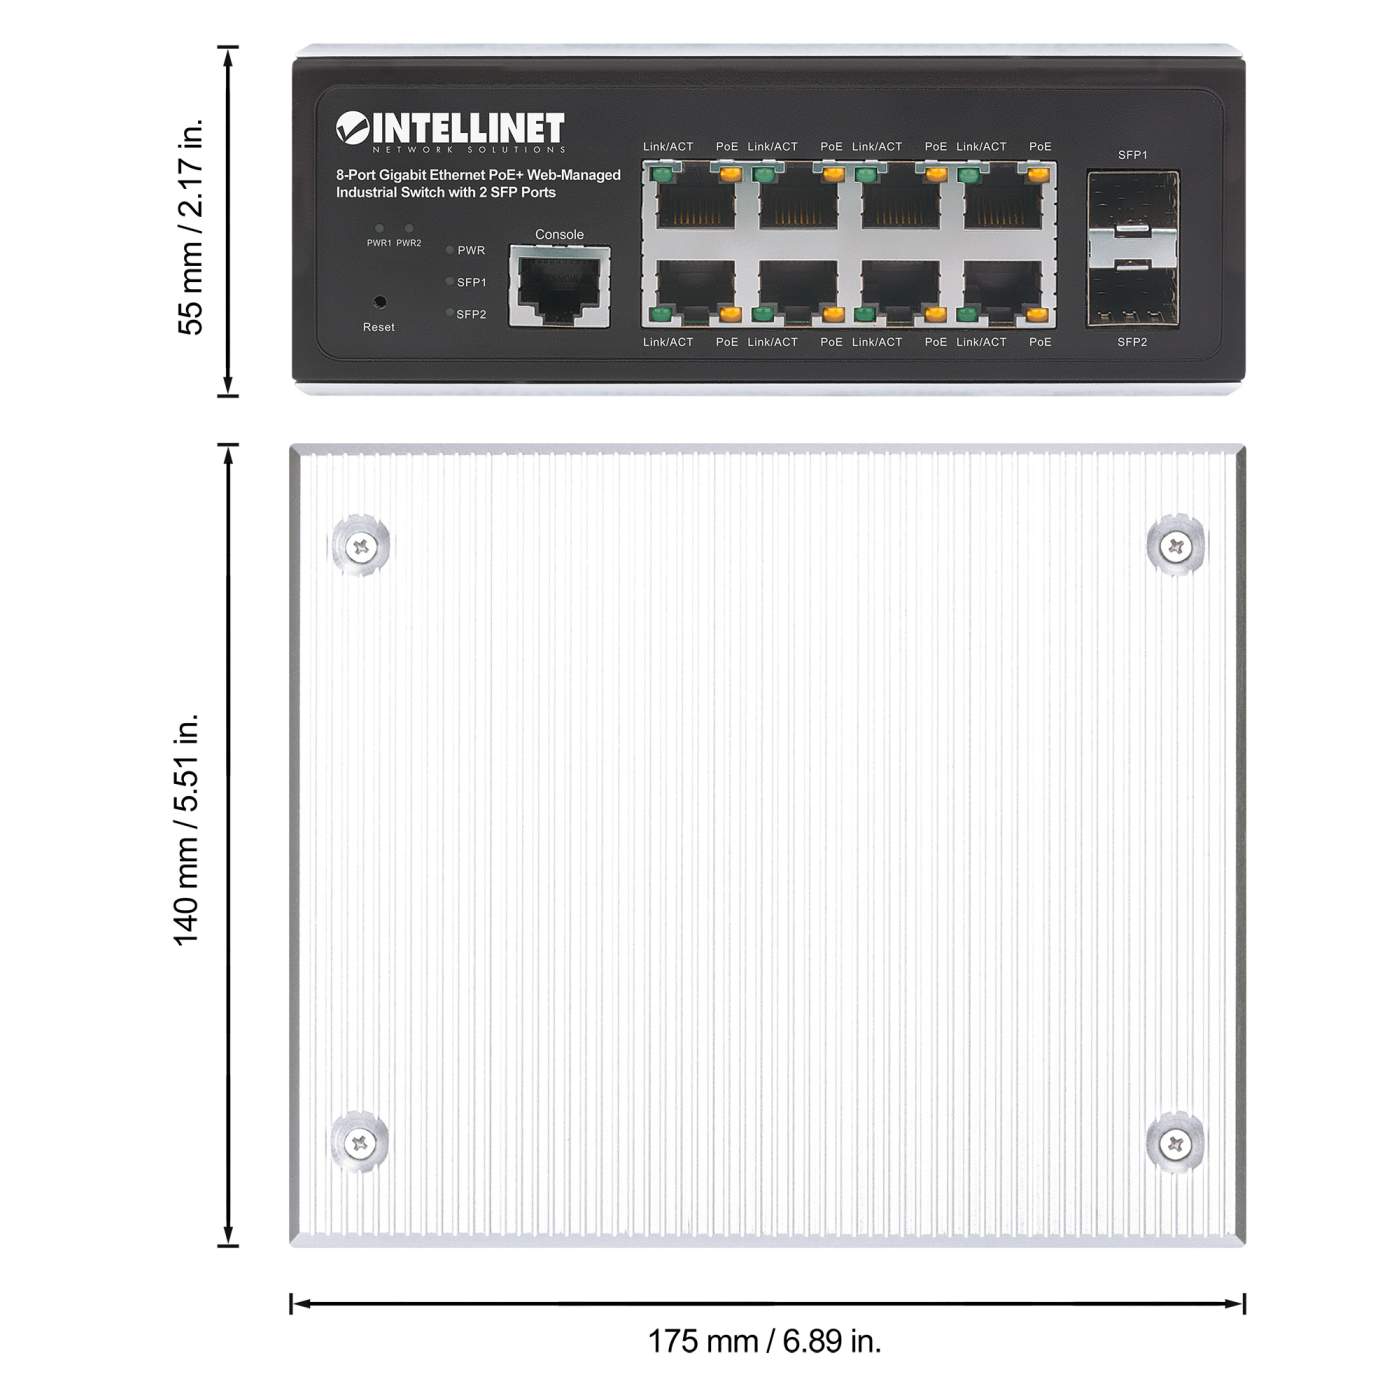 Industrial 8 Port Gigabit PoE Switch - 4 x PoE+ 30W - Power Over Ethernet -  Hardened GbE Layer/L2 Managed Switch - Rugged High Power Gigabit Network